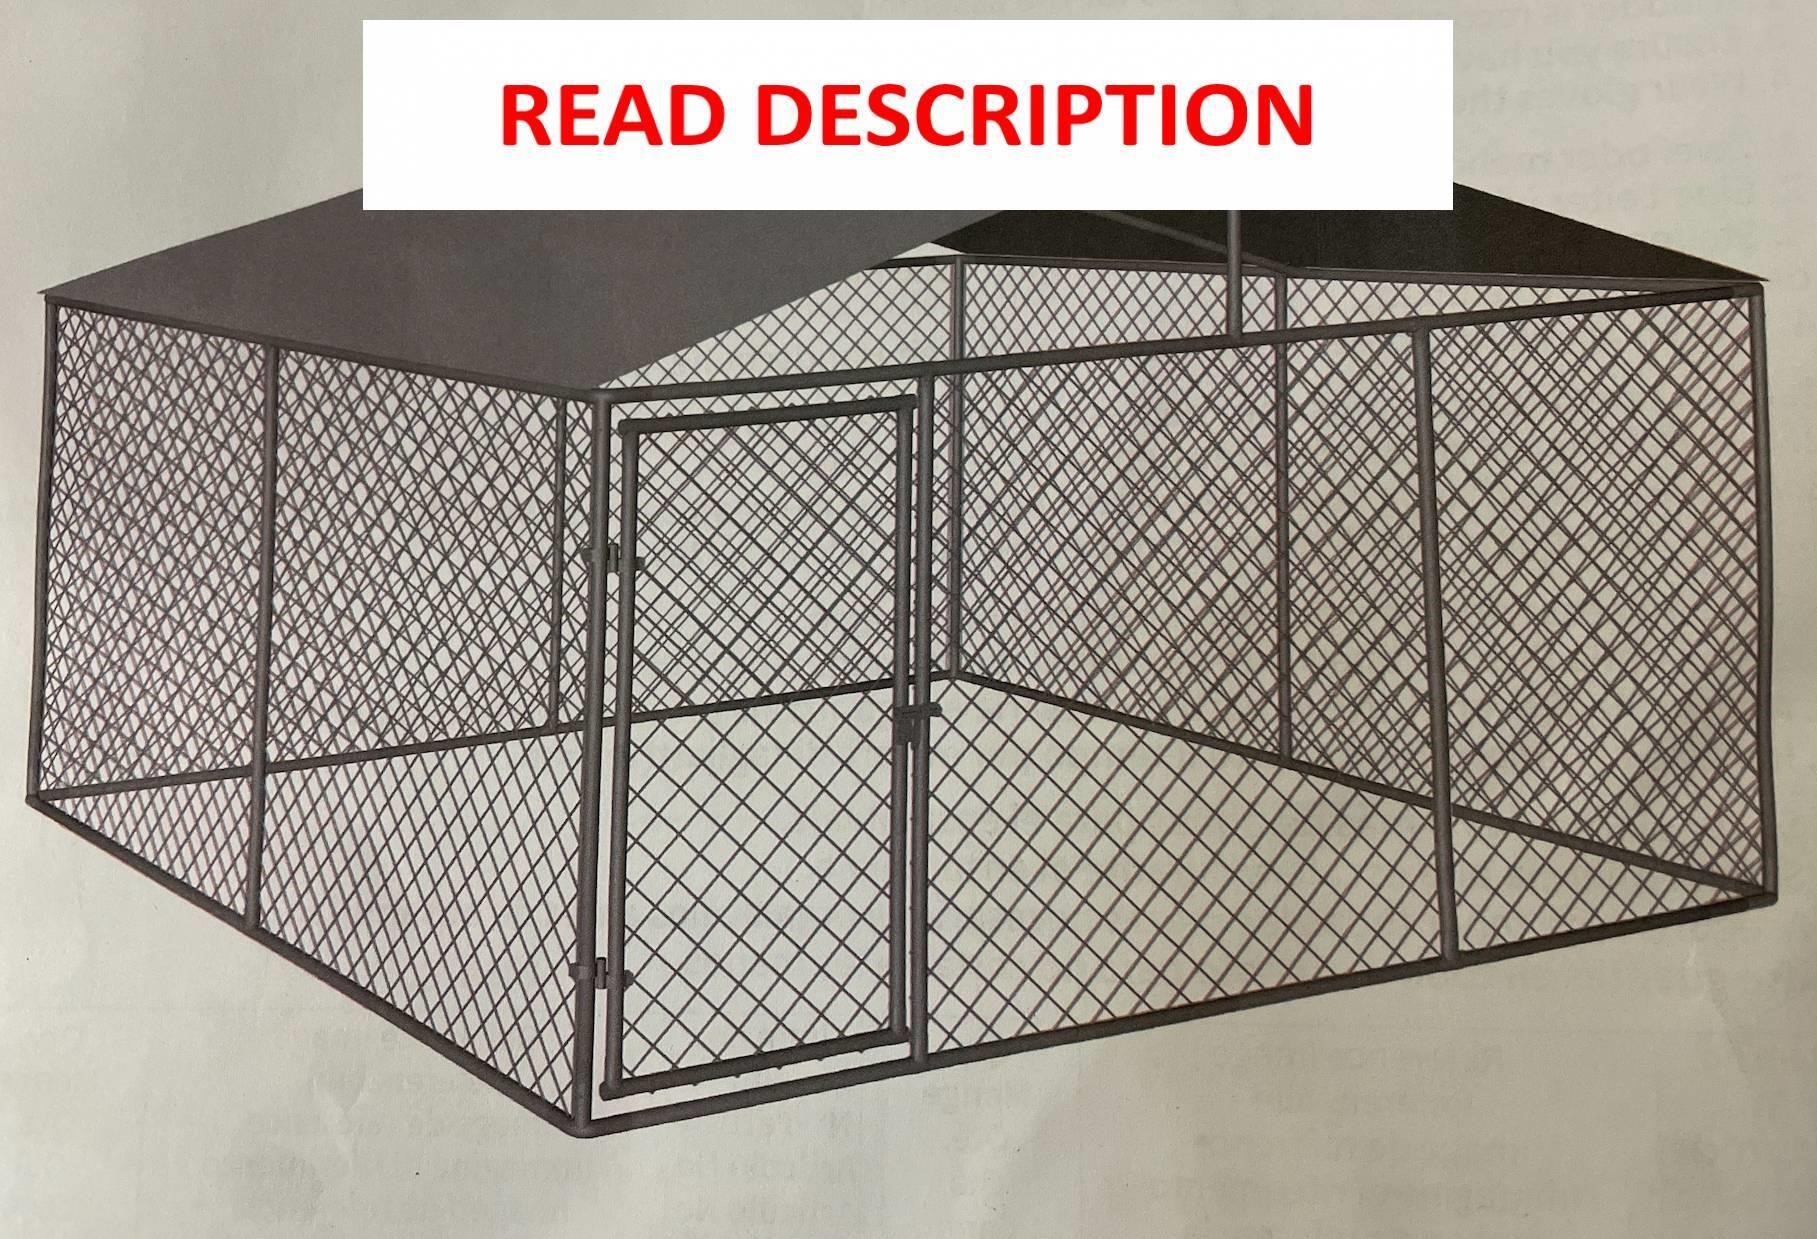 Outdoor Dog Cage